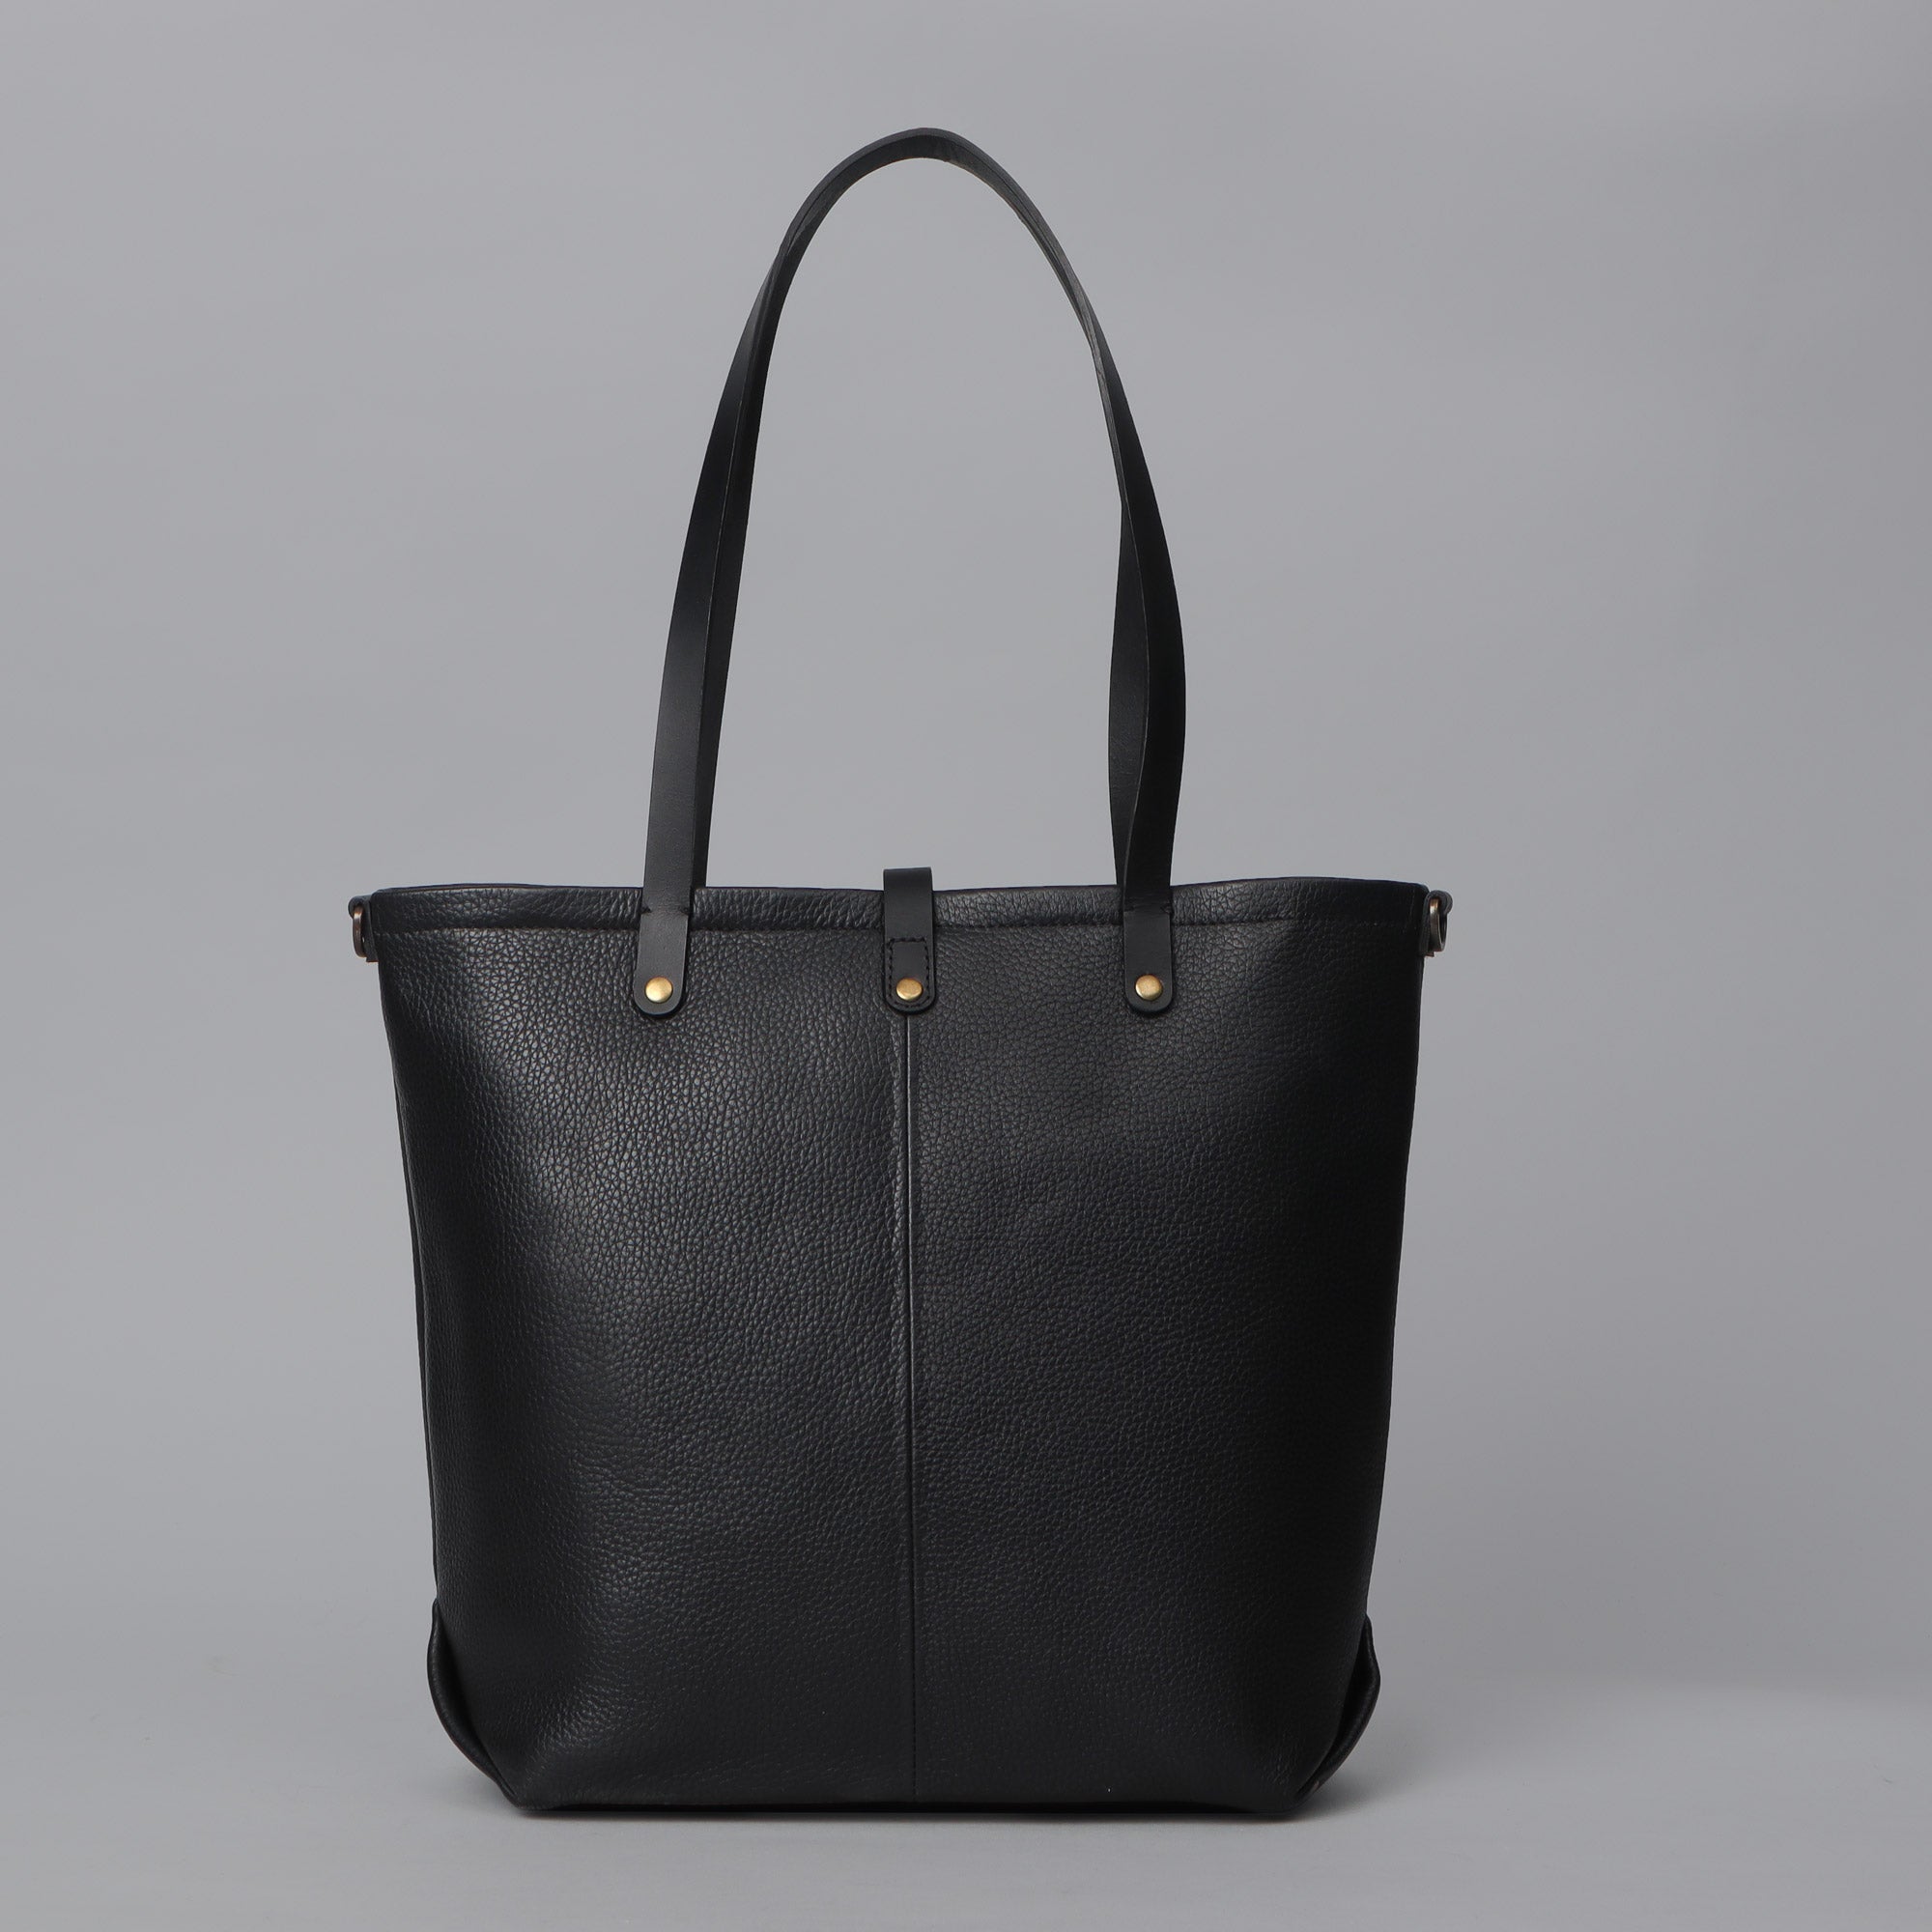 Black leather canvas tote